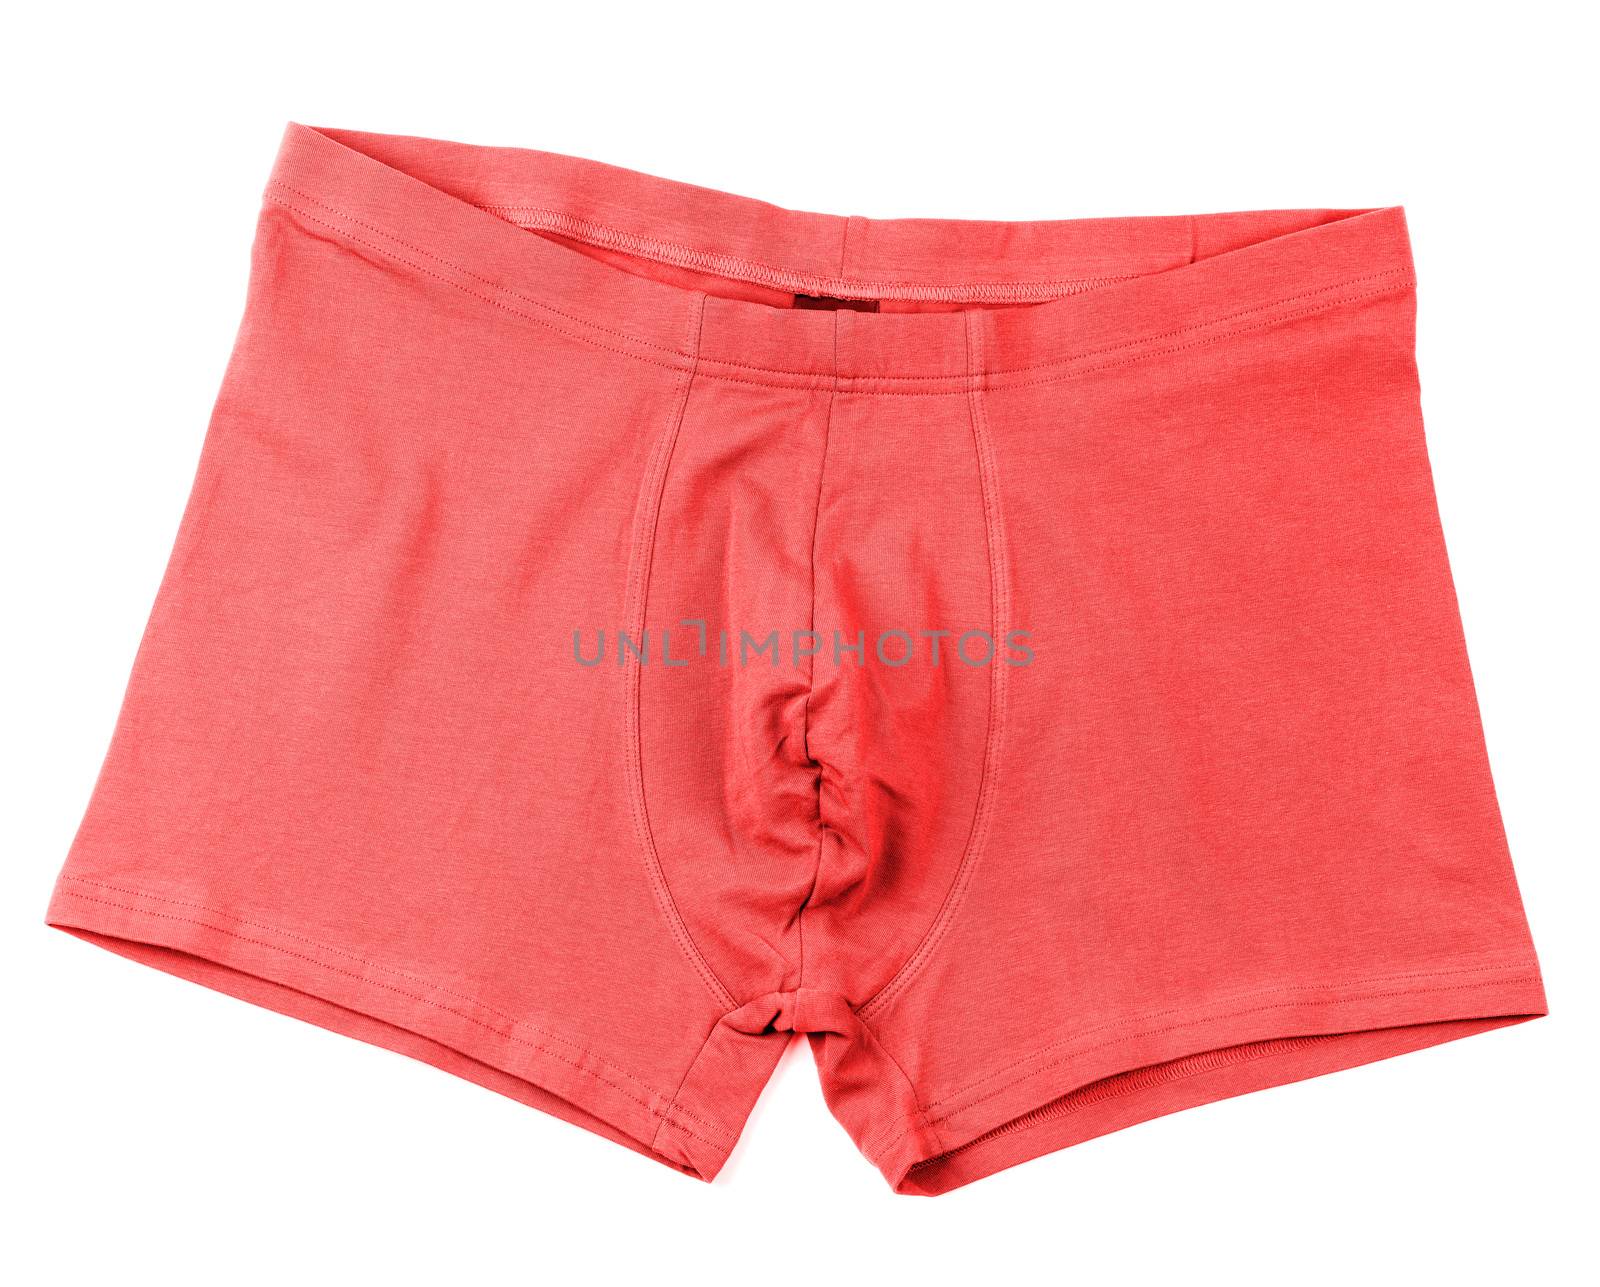 Red men's Boxer briefs isolated on a white background